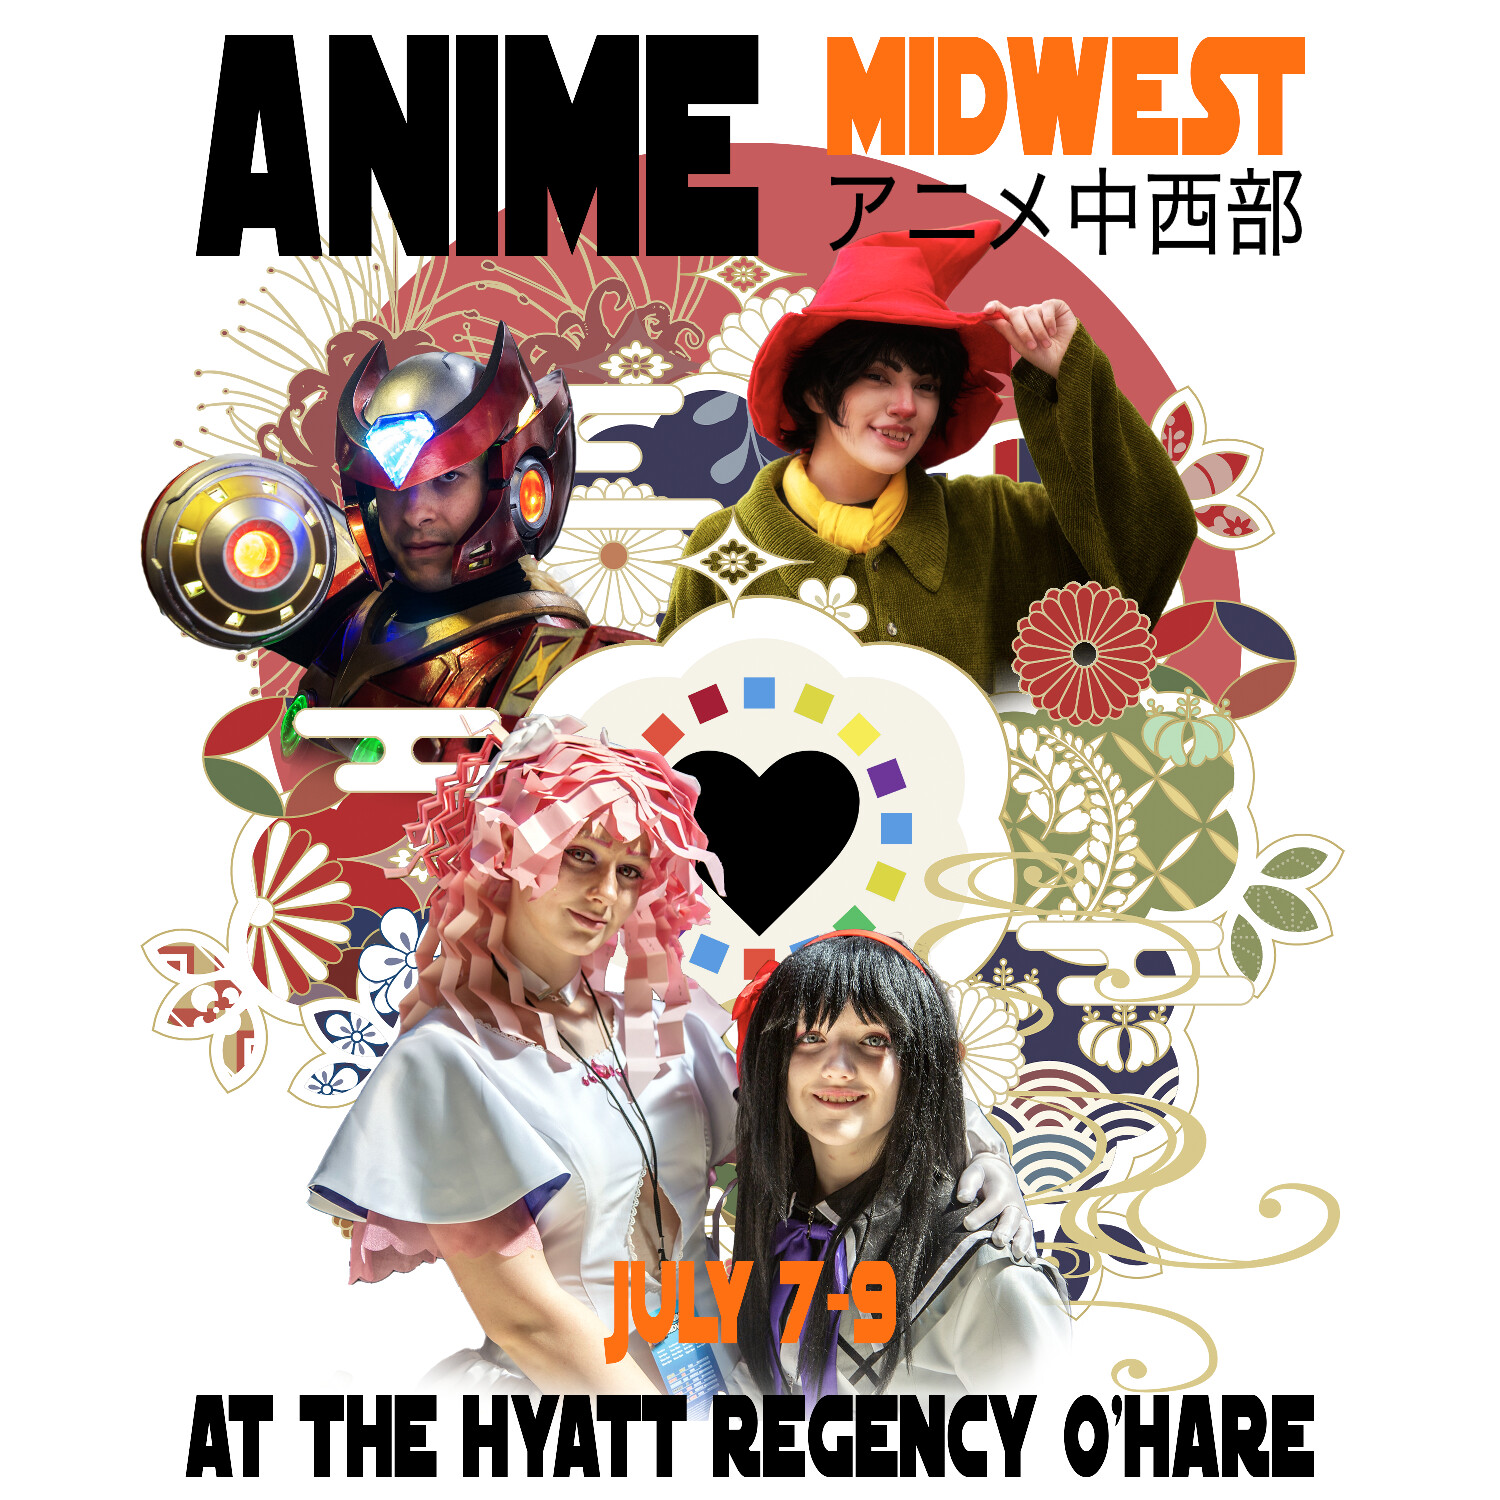 Anime Midwest Conventions Musical Guests Unable to Perform After Visa  Issues  Interest  Anime News Network